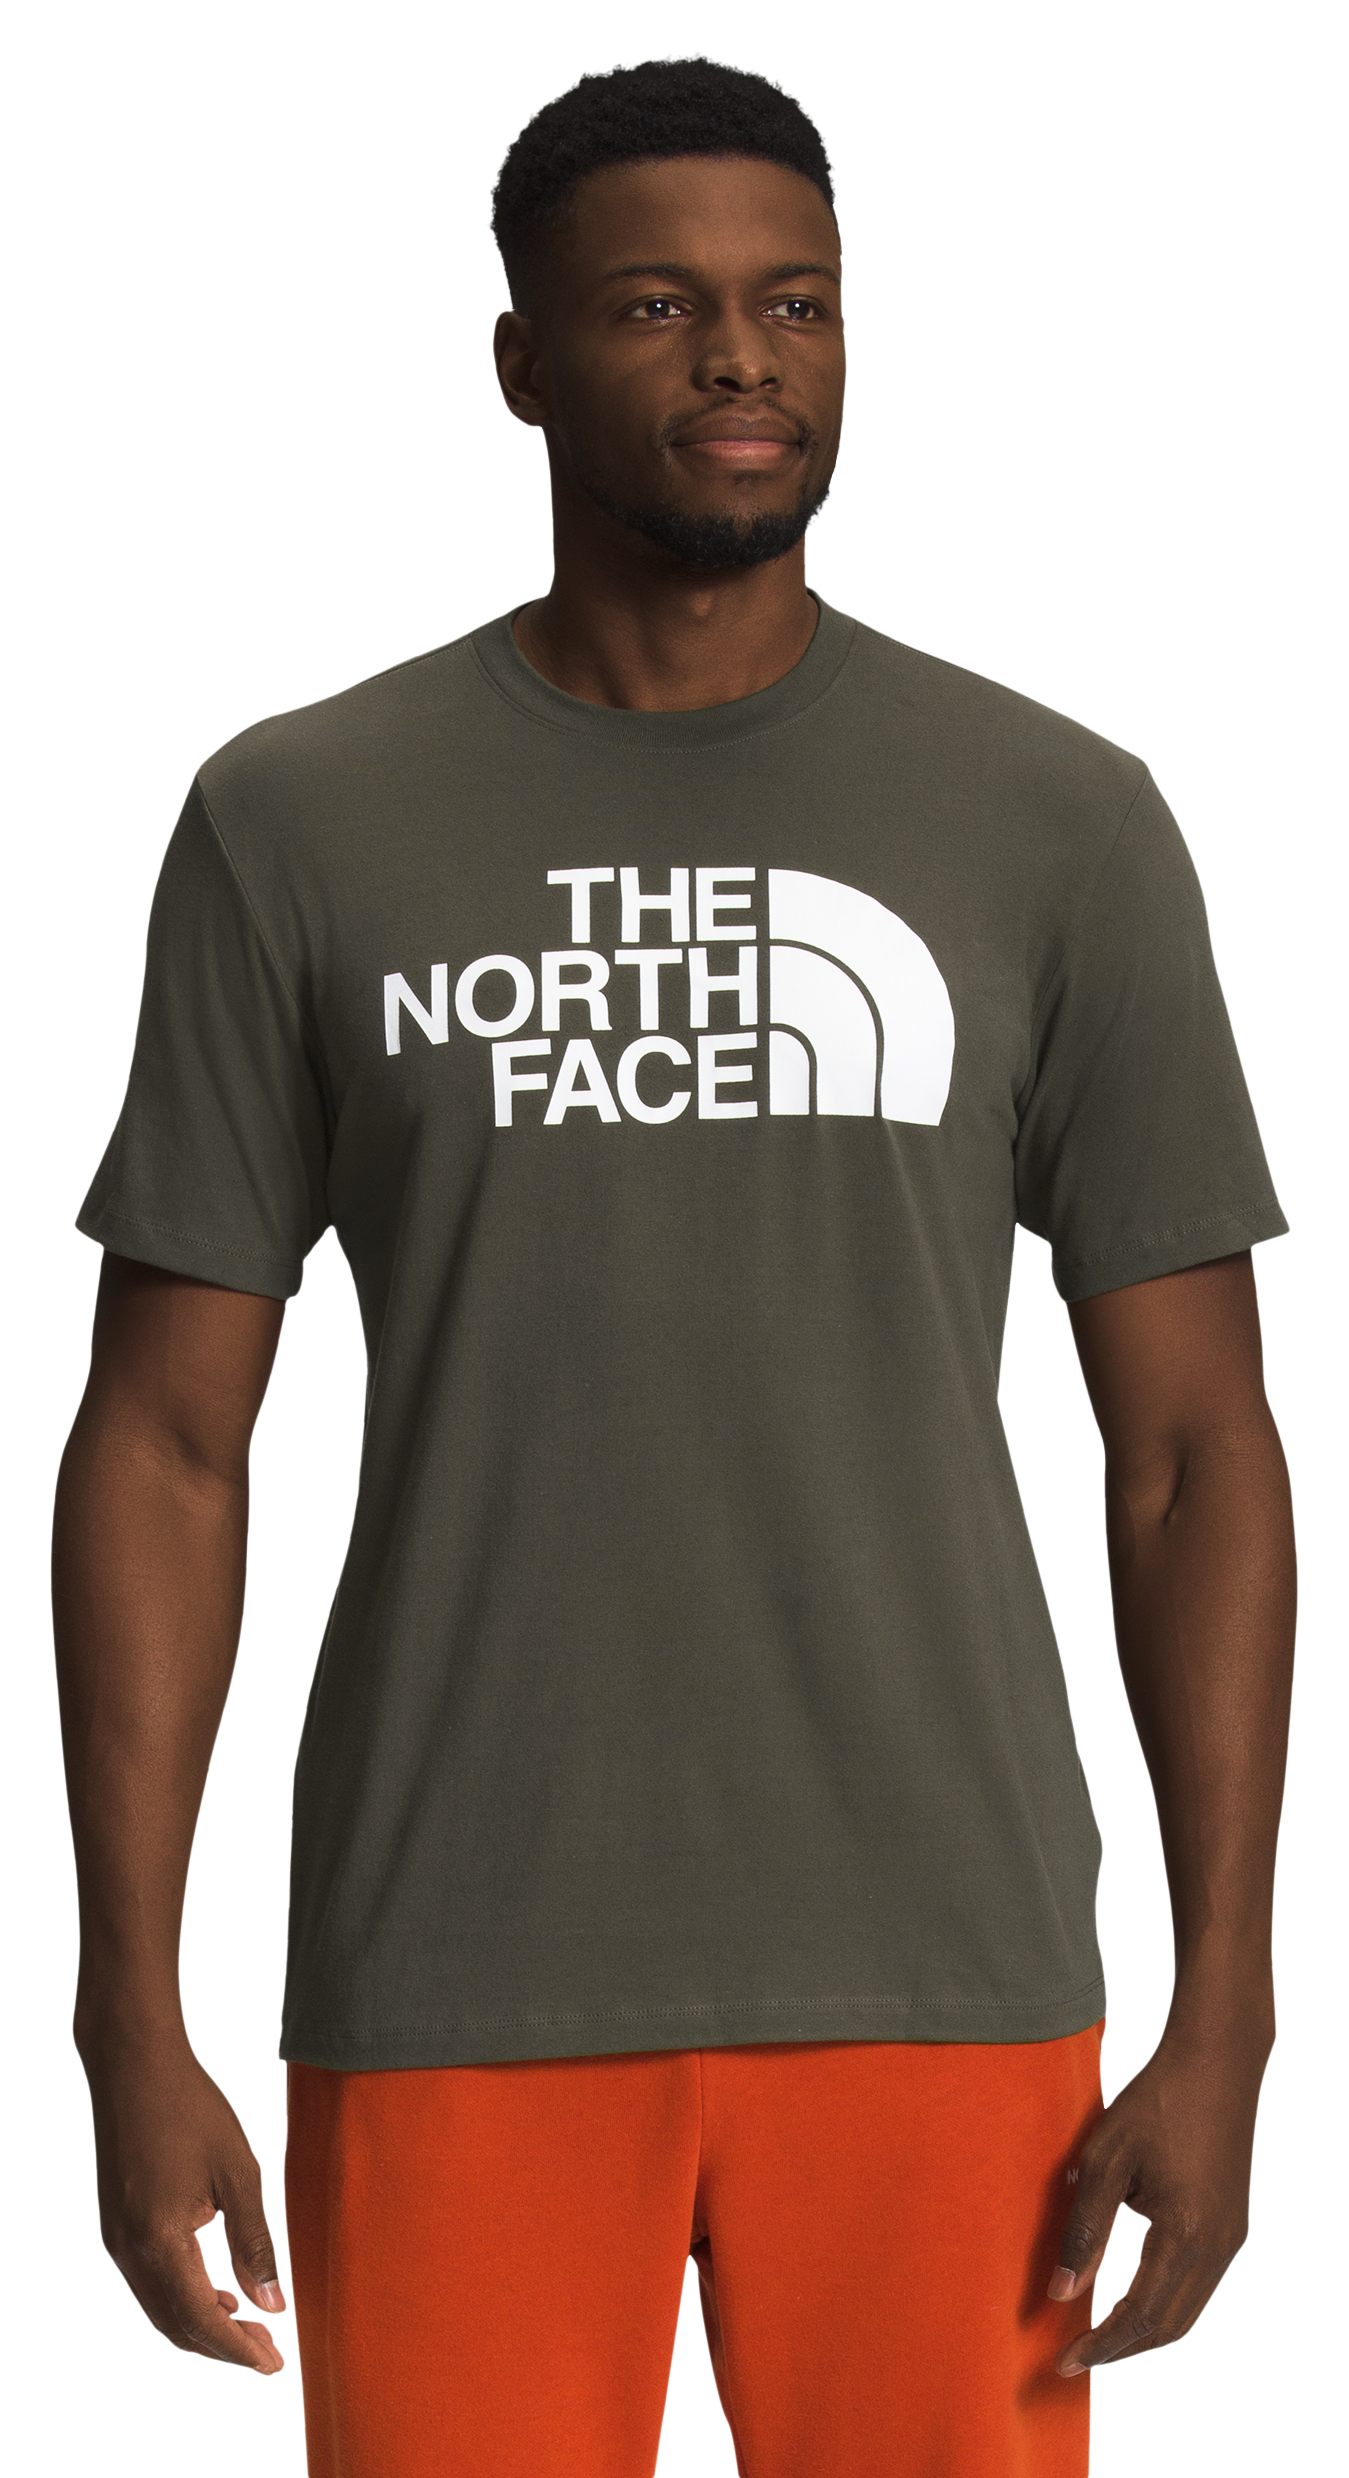 The North Face Half Dome Short-Sleeve T-Shirt for Men - New Taupe Green/White - M